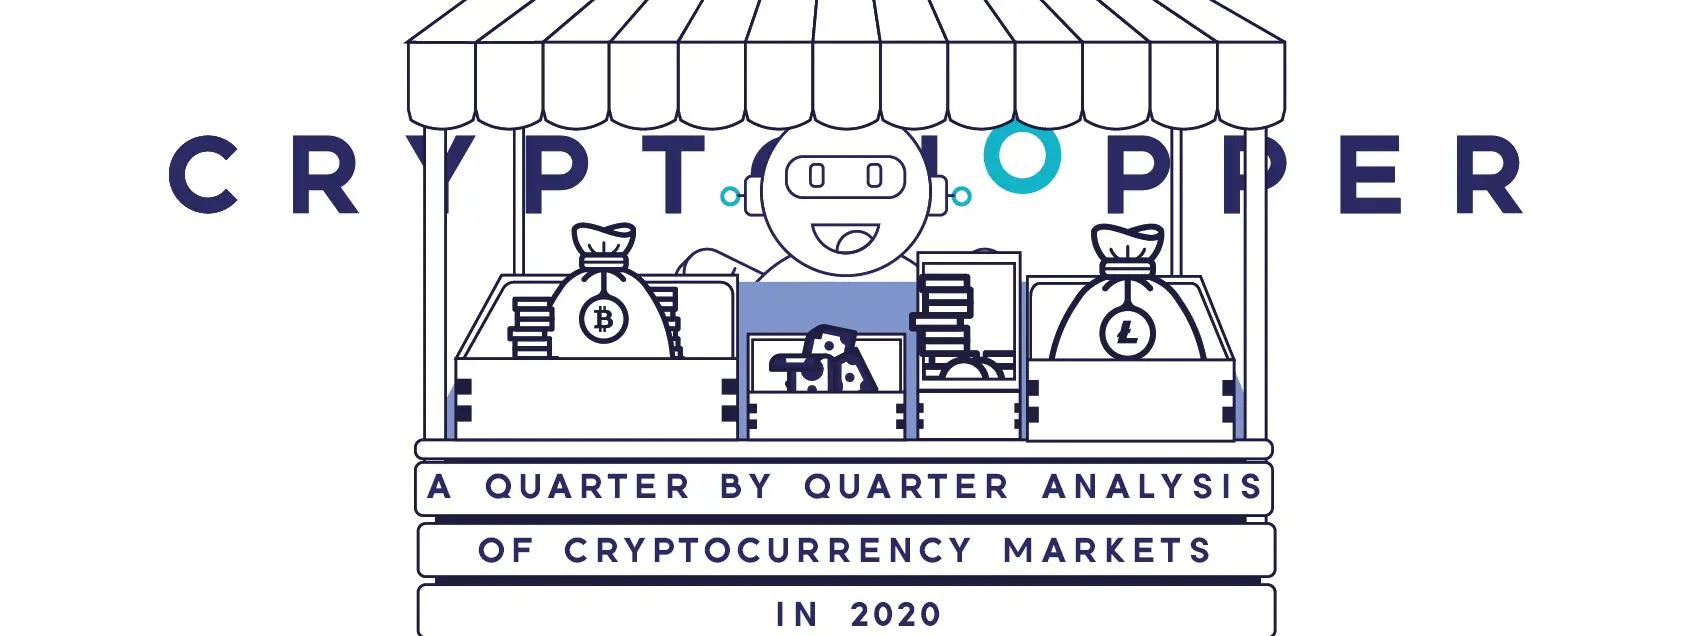 A Quarter by Quarter Analysis of Cryptocurrency Markets in 2020